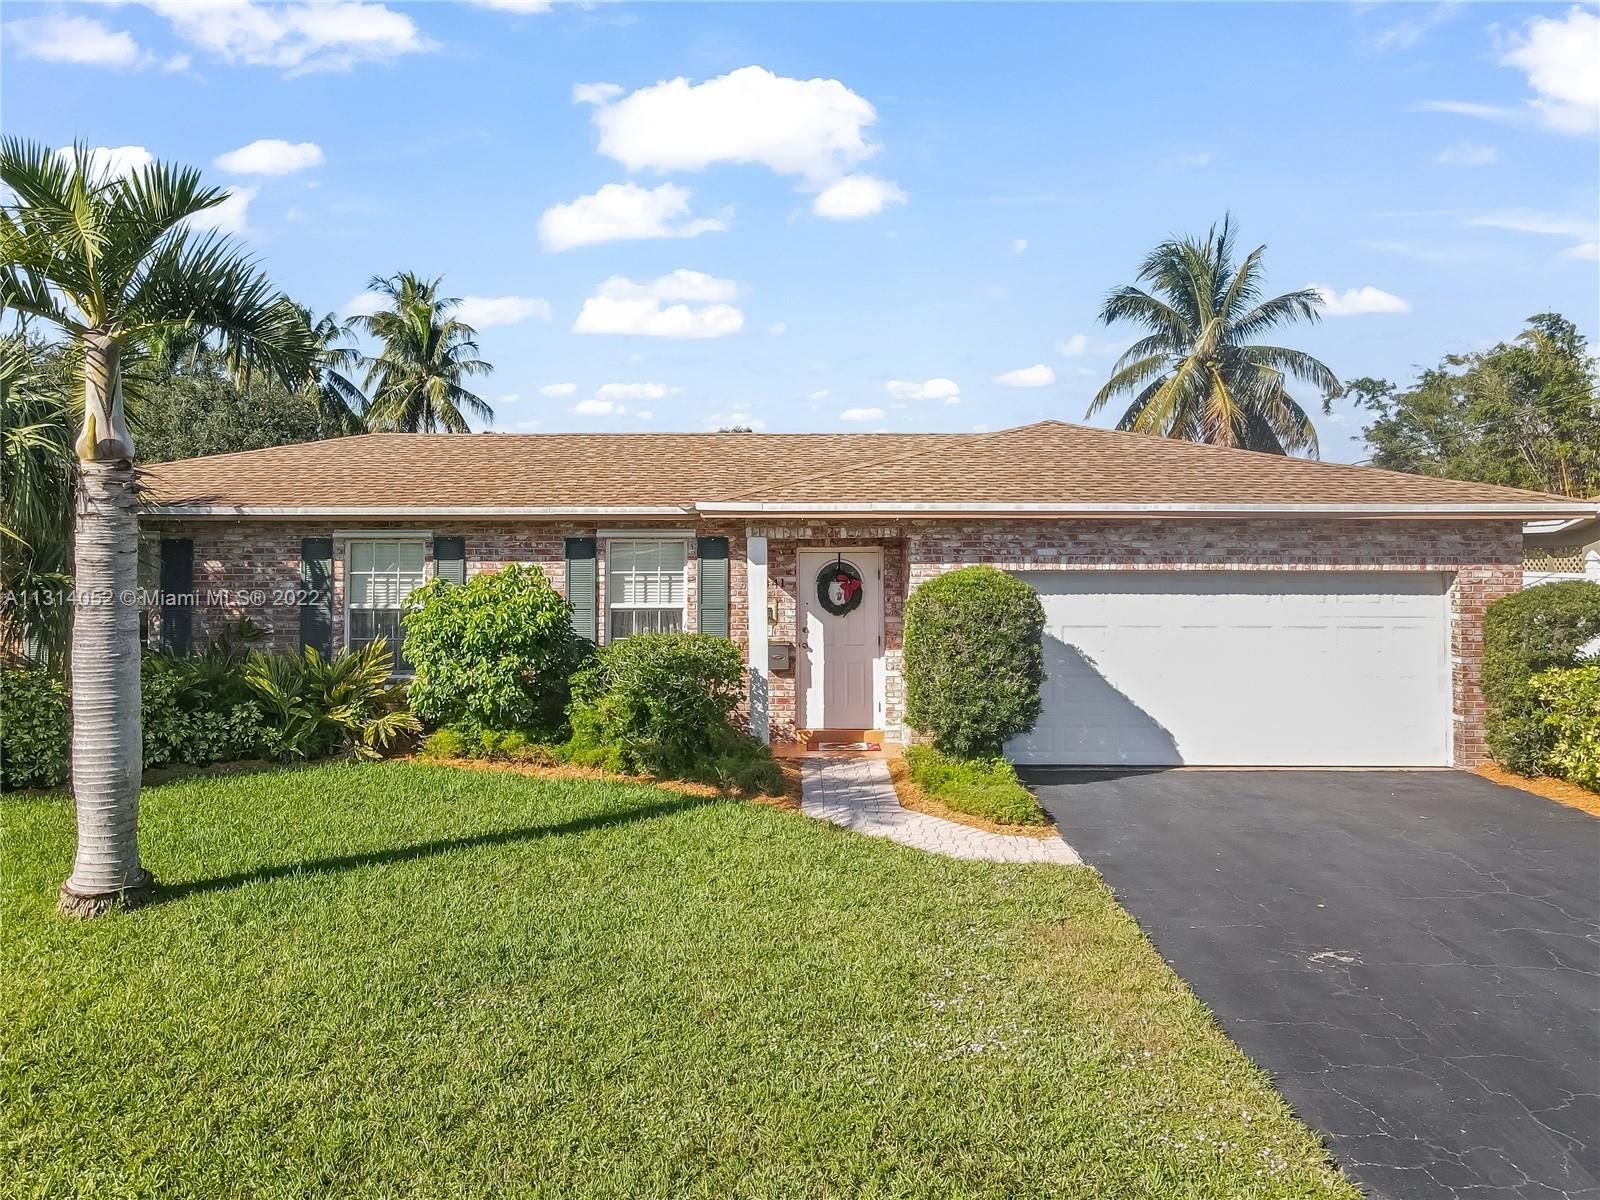 Real estate property located at 1341 57th Ave, Broward County, Plantation, FL